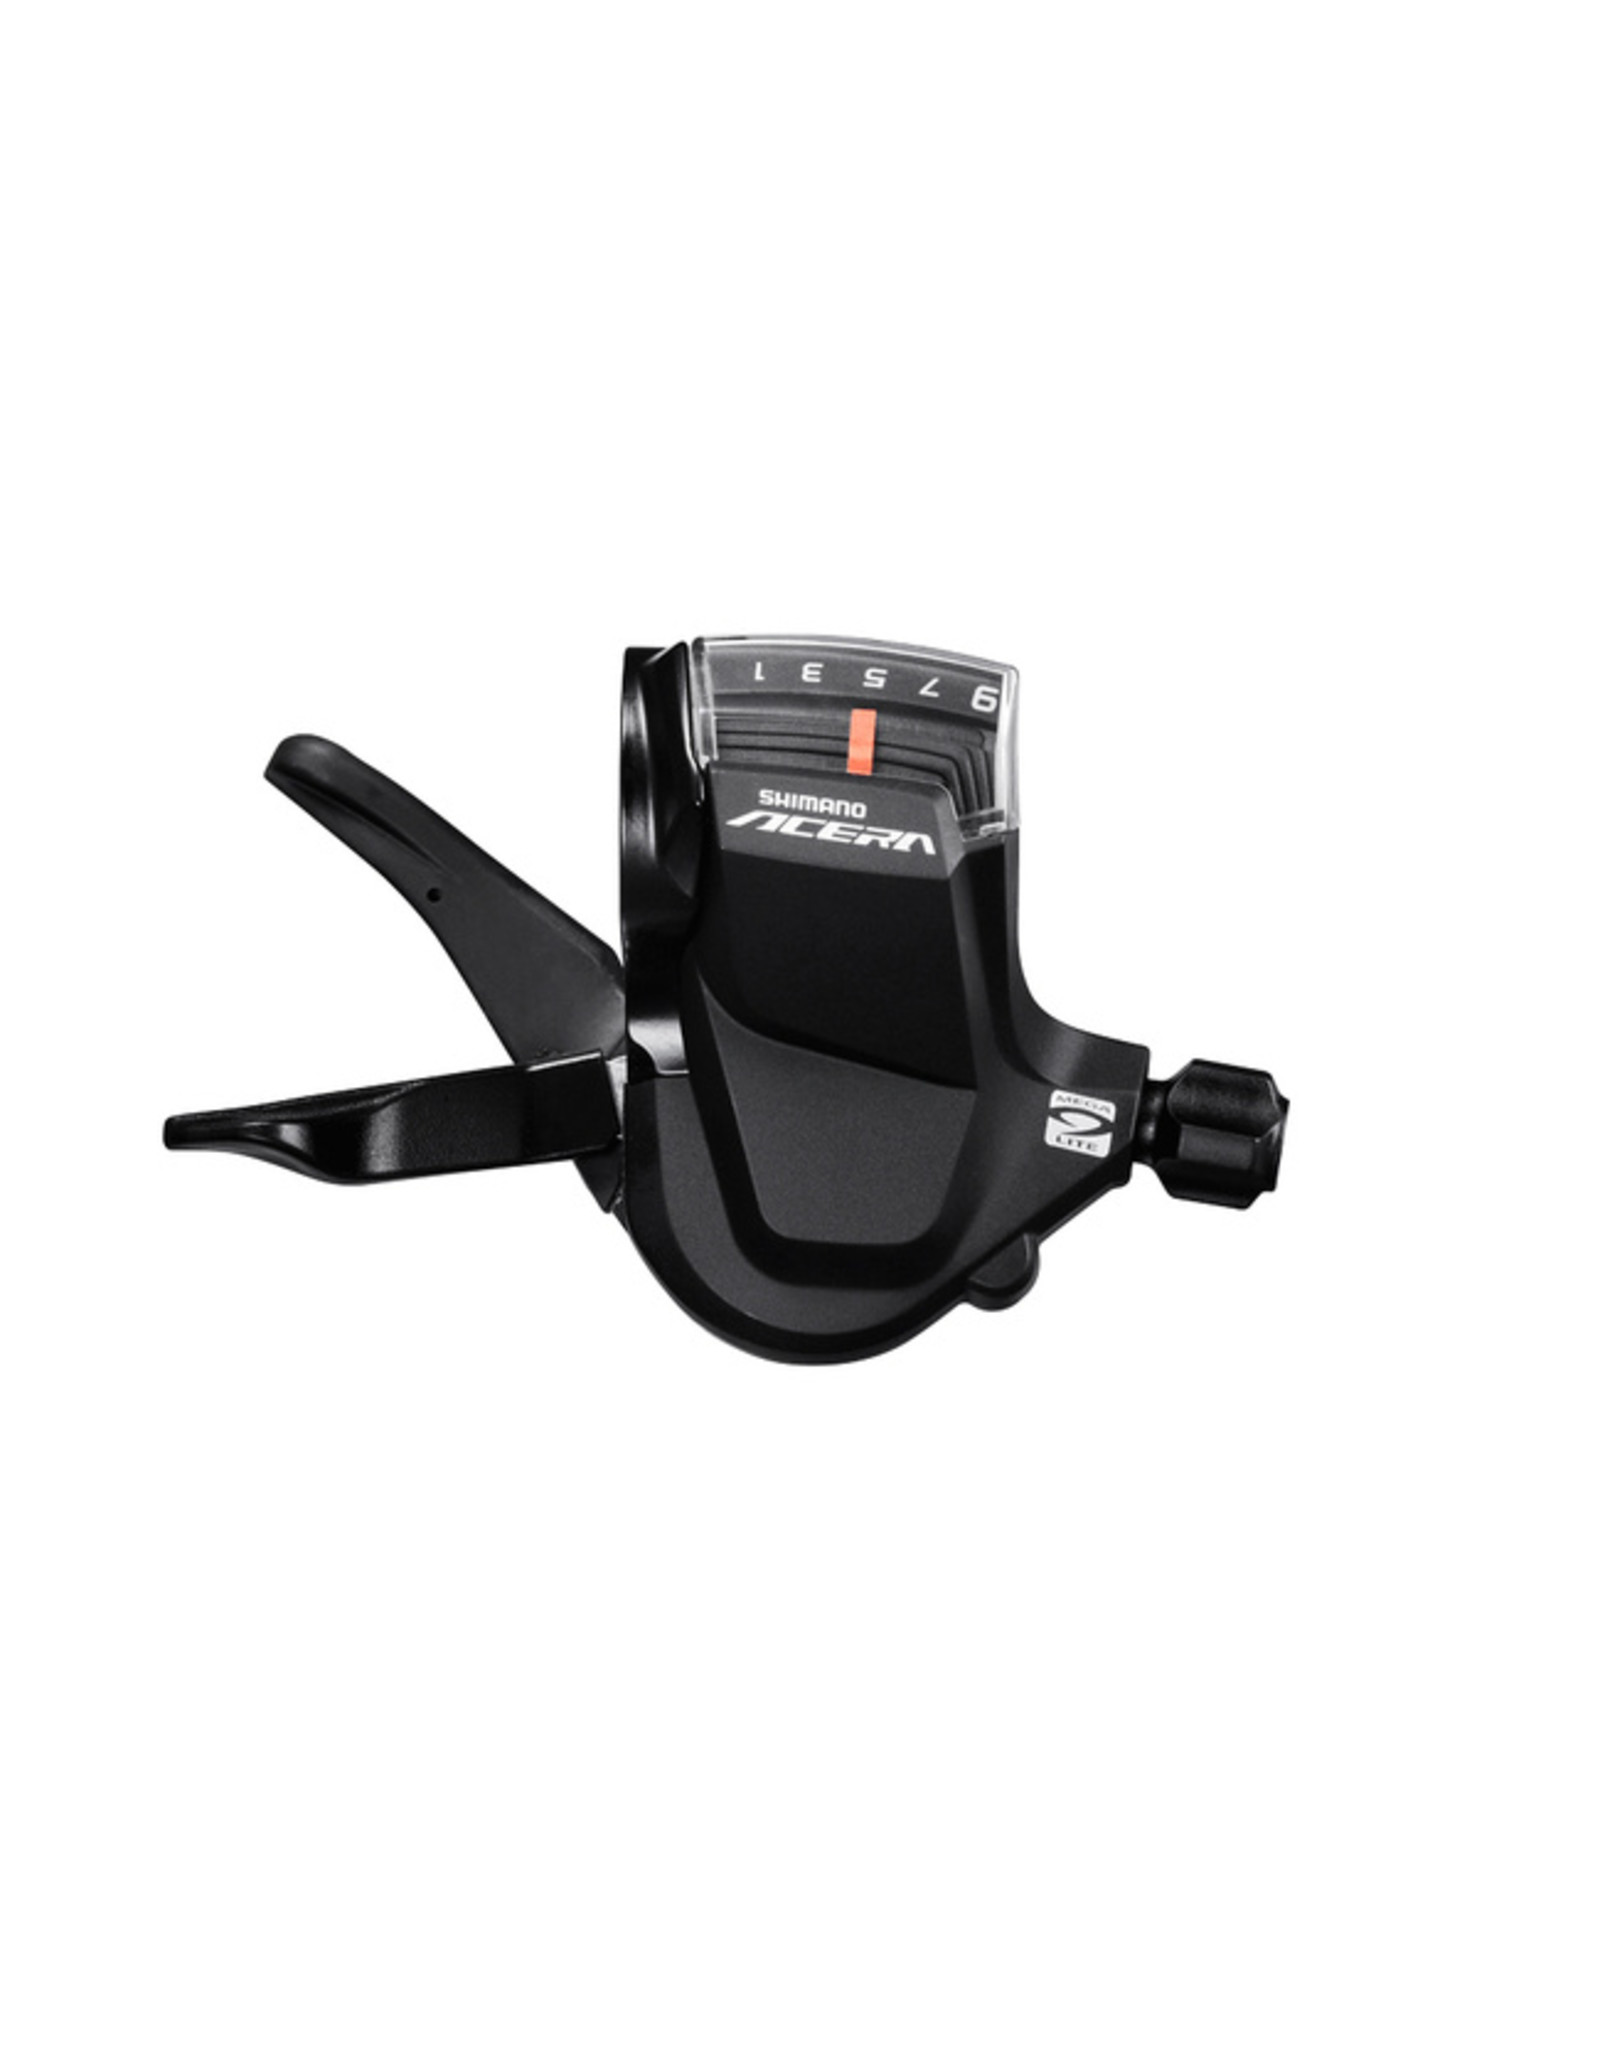 SHIMANO Shift Lever SL-M3000-R - Acera - Right 9-Speed  Rapdfire Plus W/ Optical Gear Display Shifter